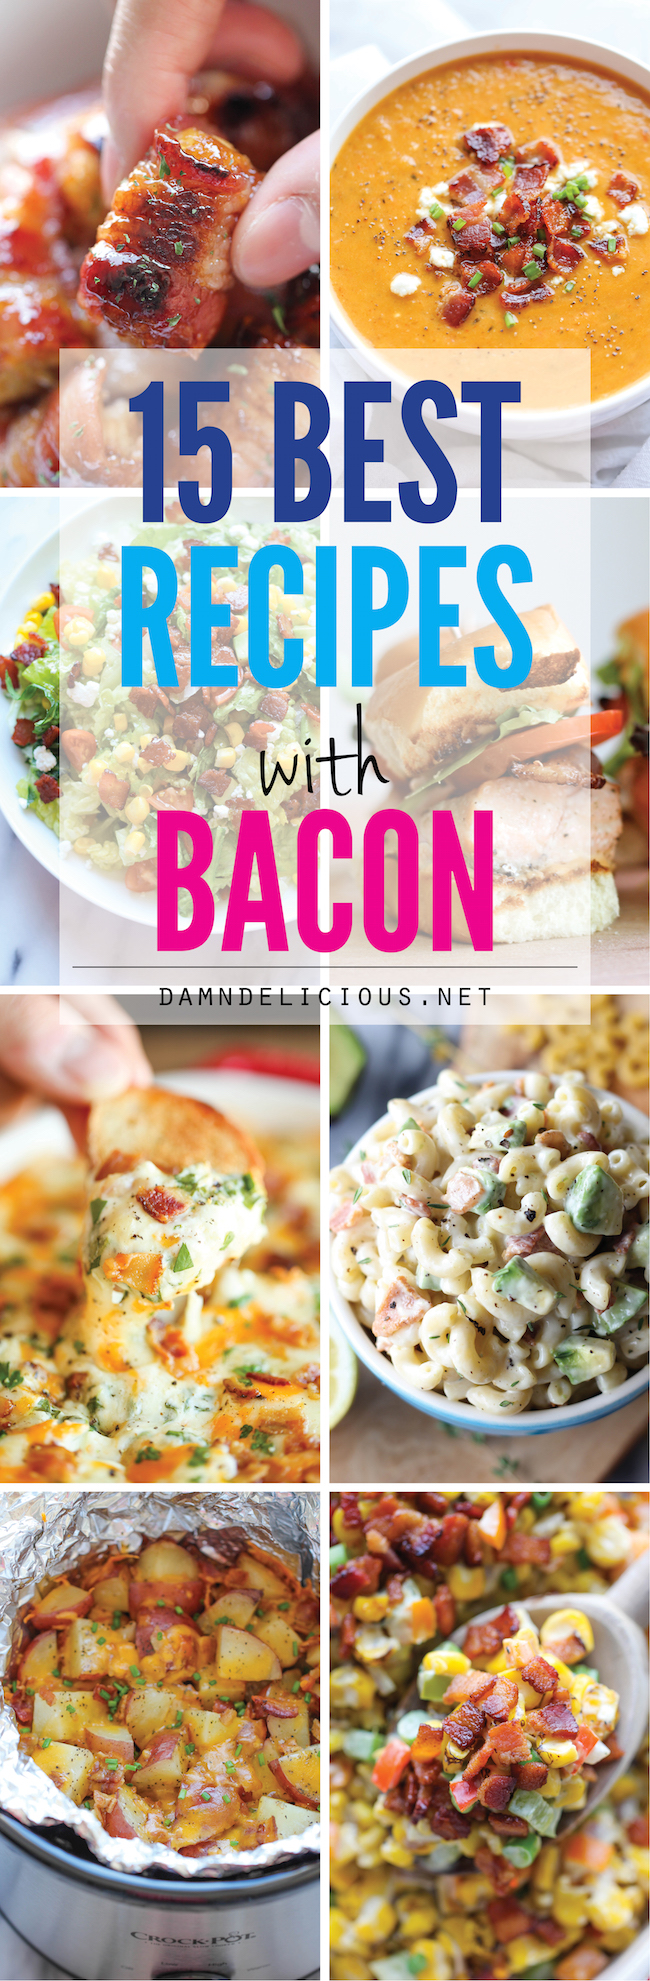 15 Best Recipes With Bacon 